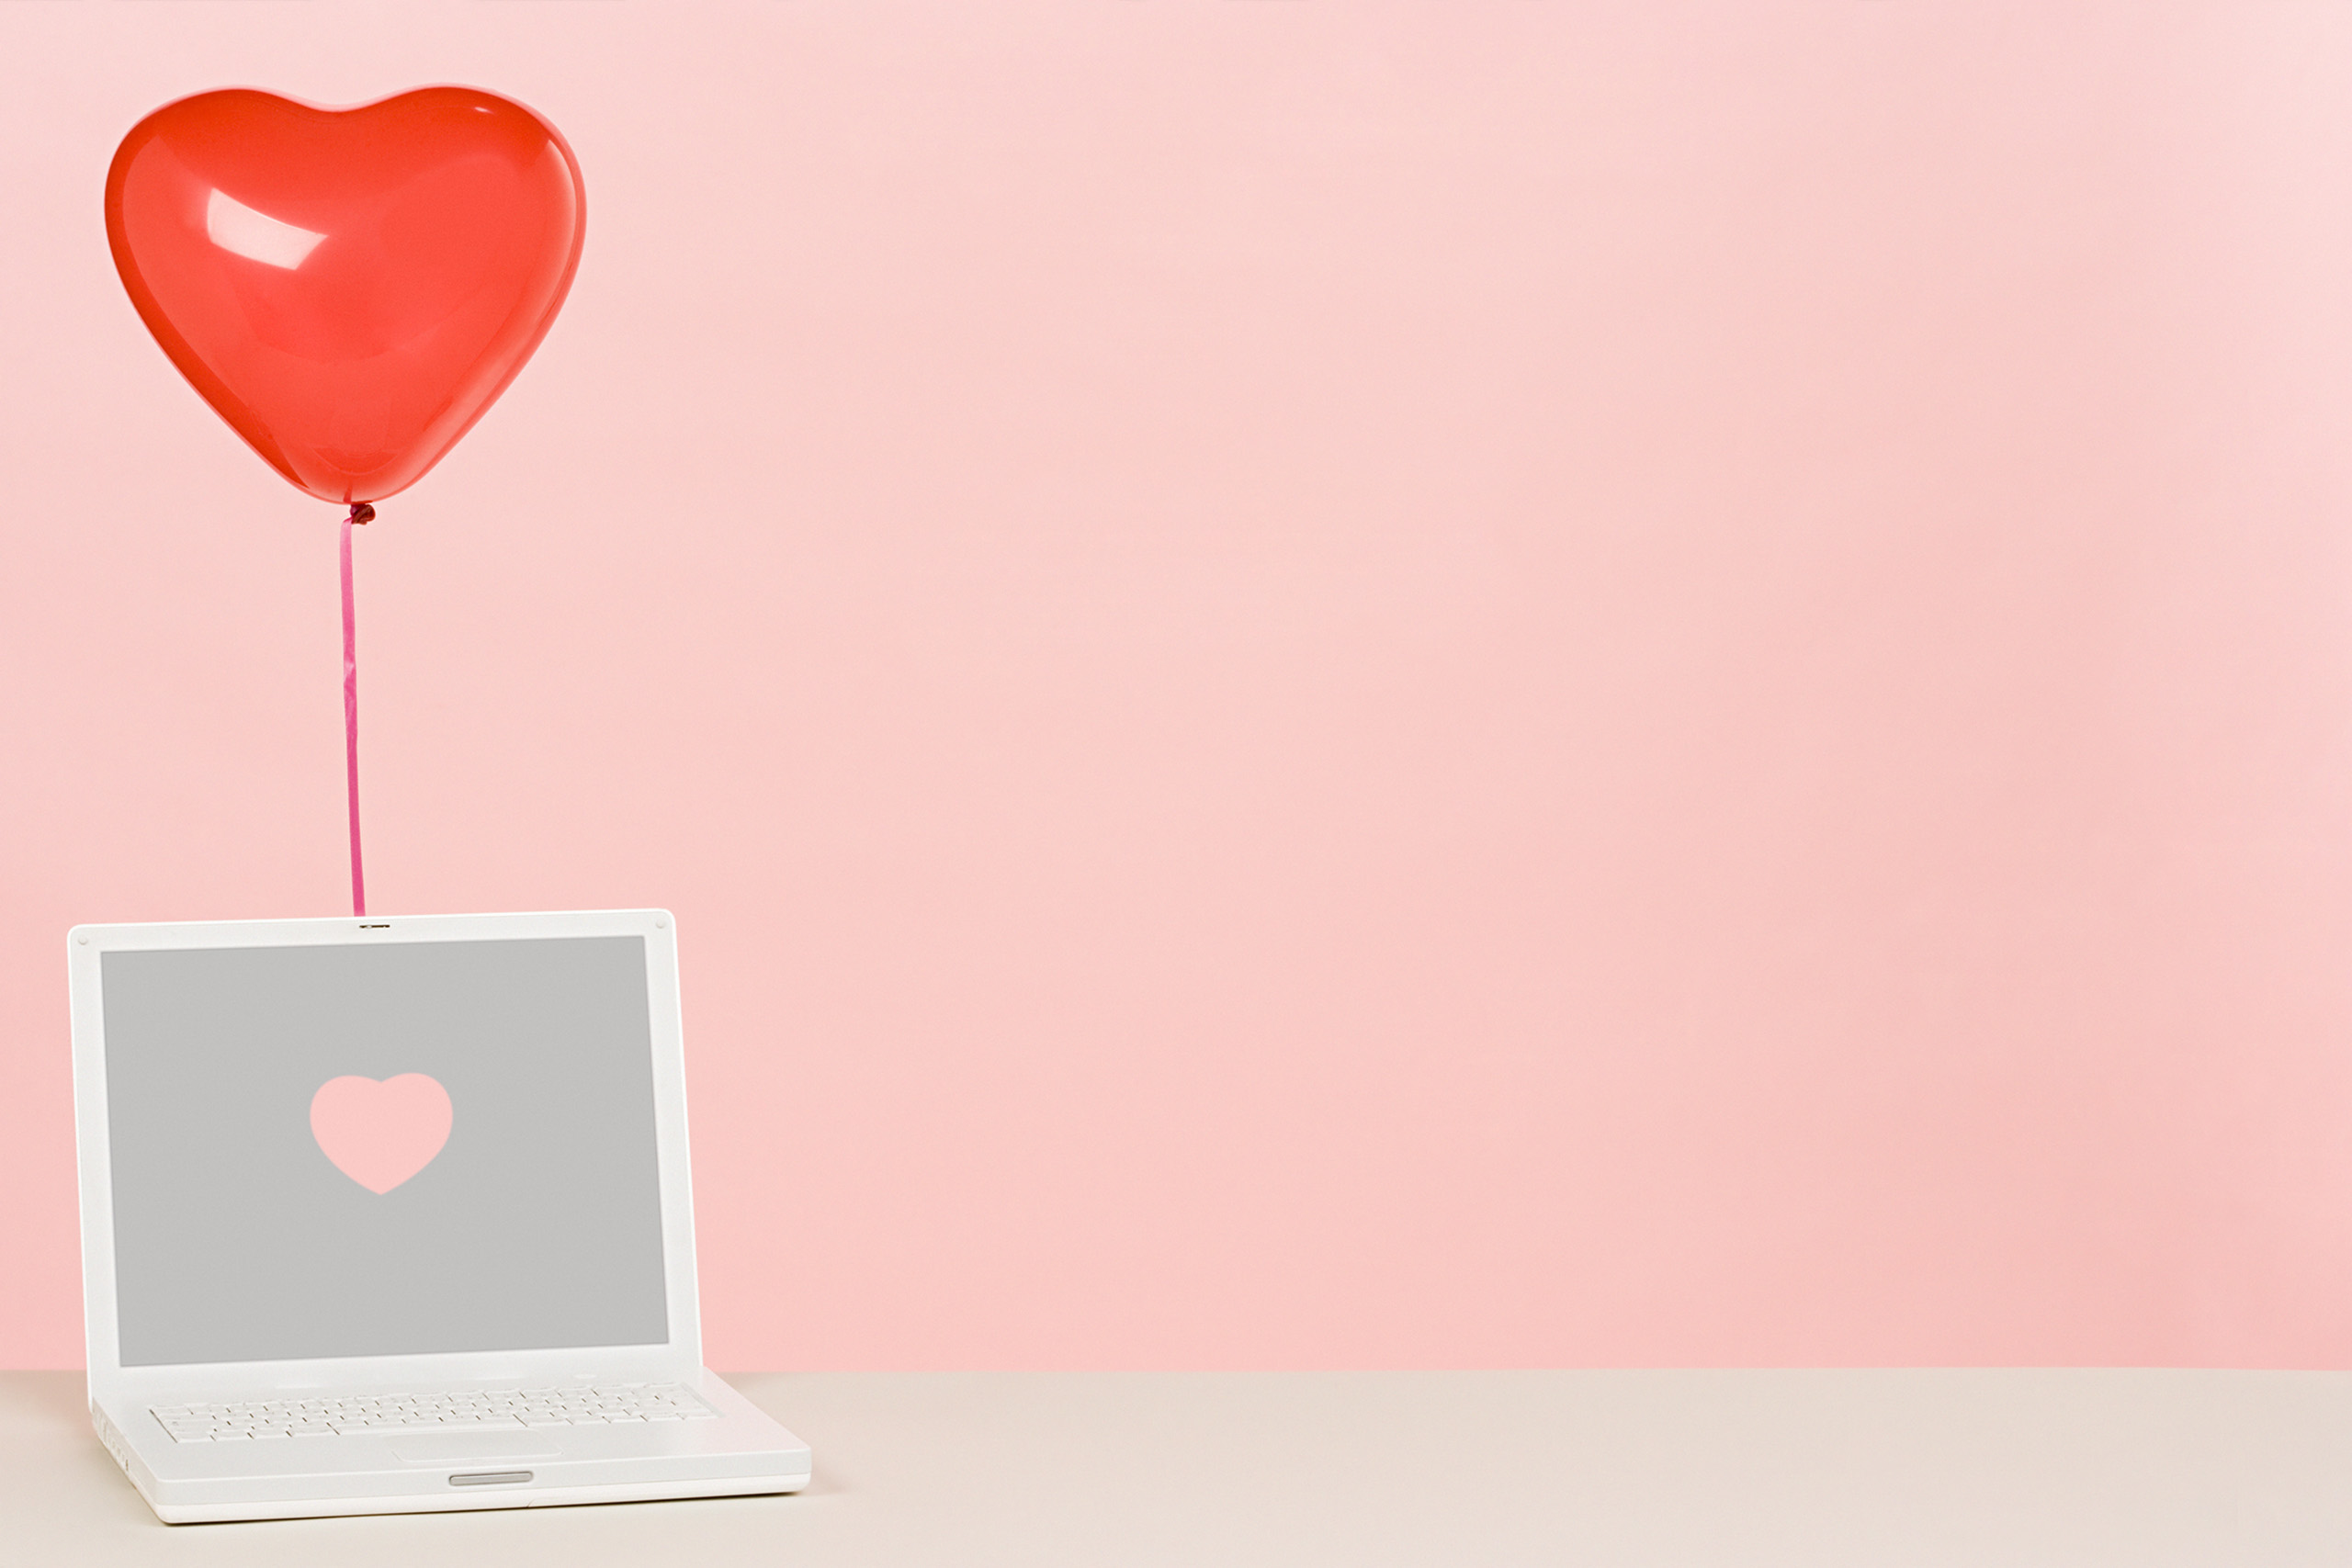 Balloon and laptop (Image Source—Getty Images)